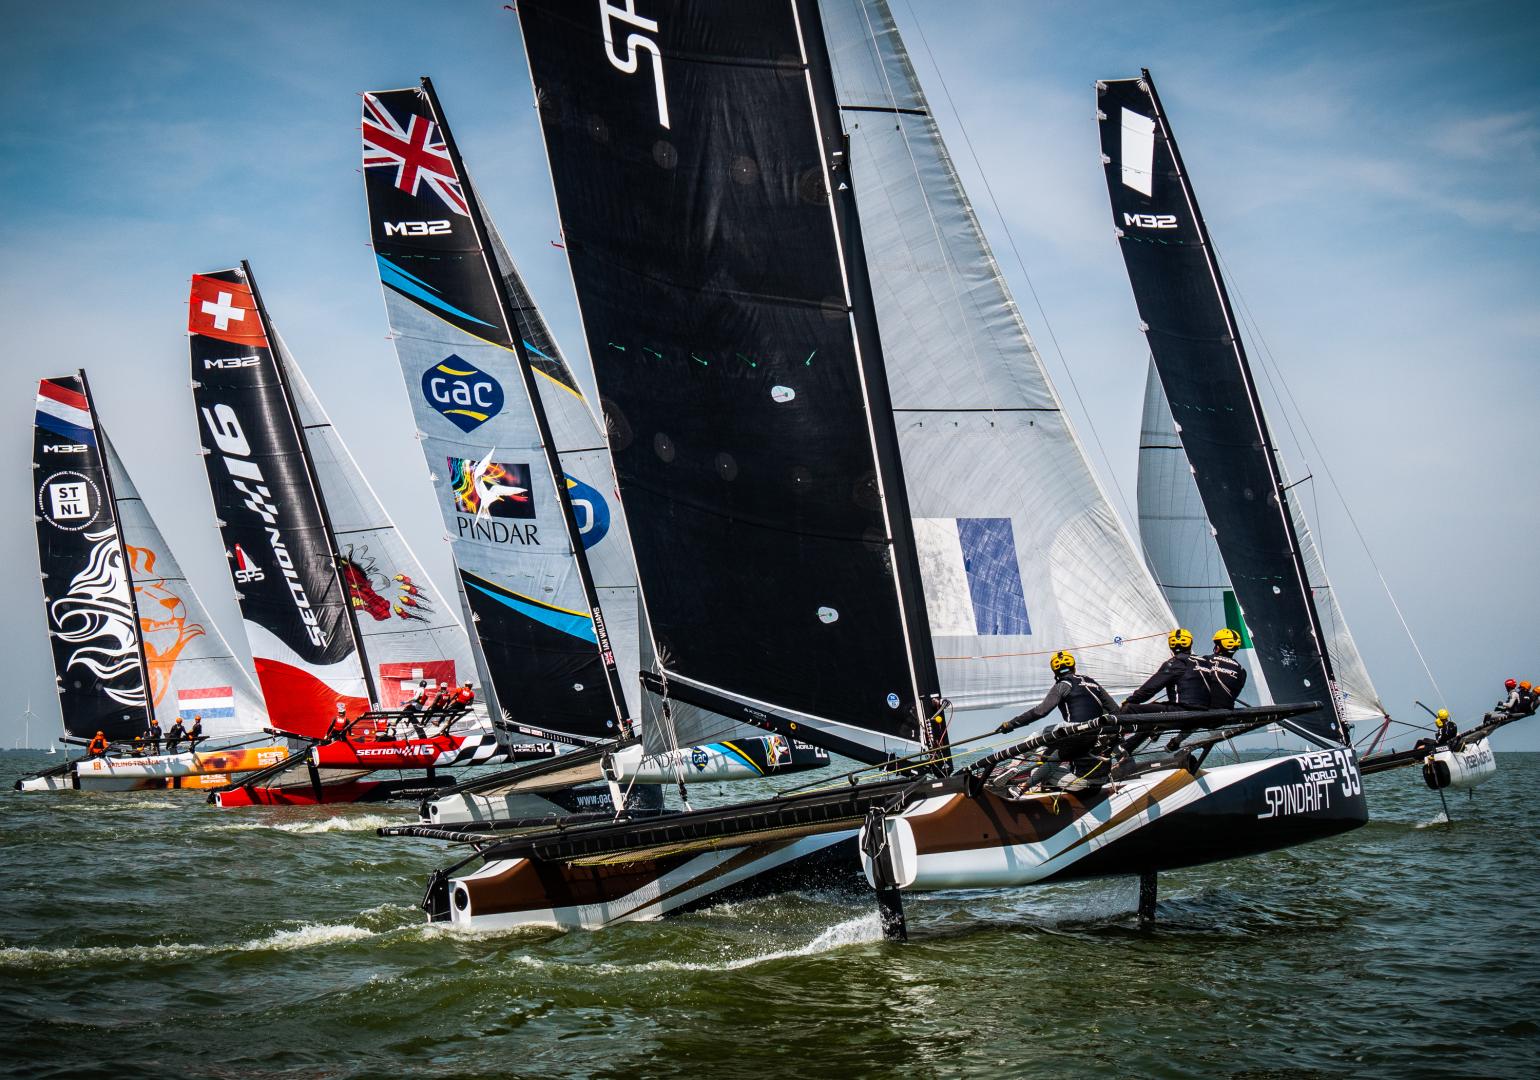 Spindrift racing, GAC Pindar, Section 16 and others head off on a reaching start. Photo: Ollie Hartas / M32 World